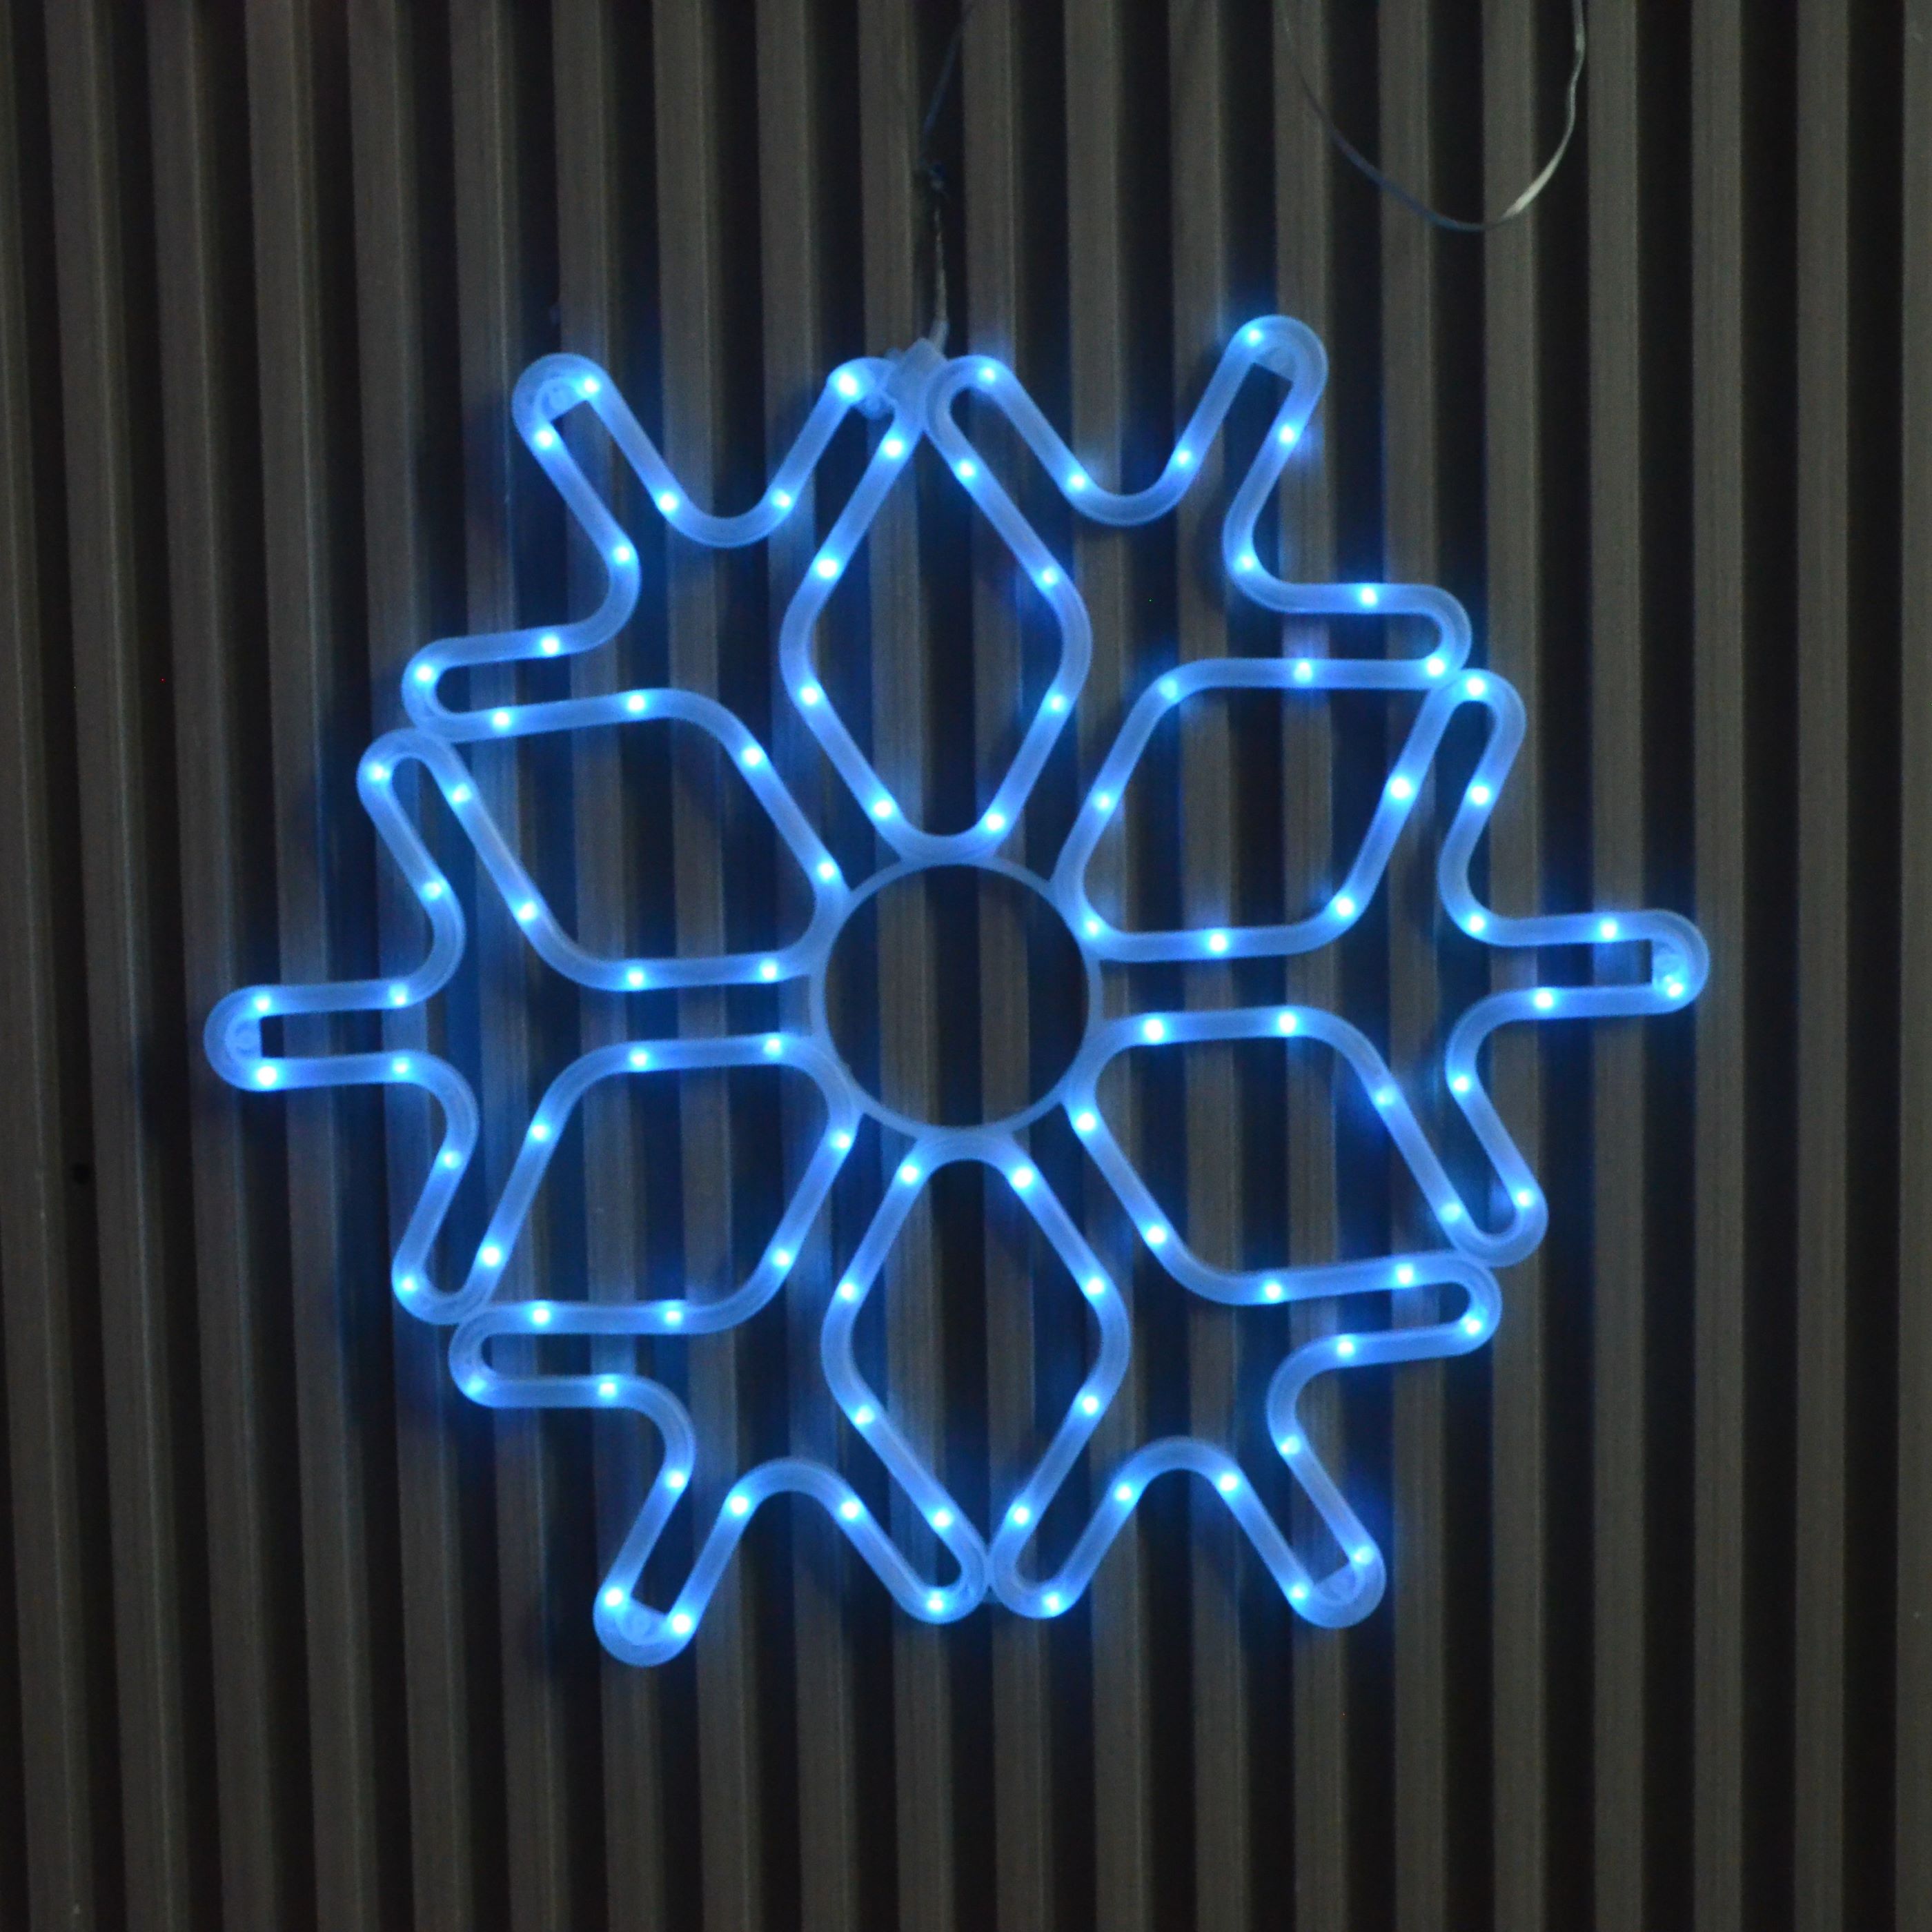 Simple and fashionable snowflake landscape light